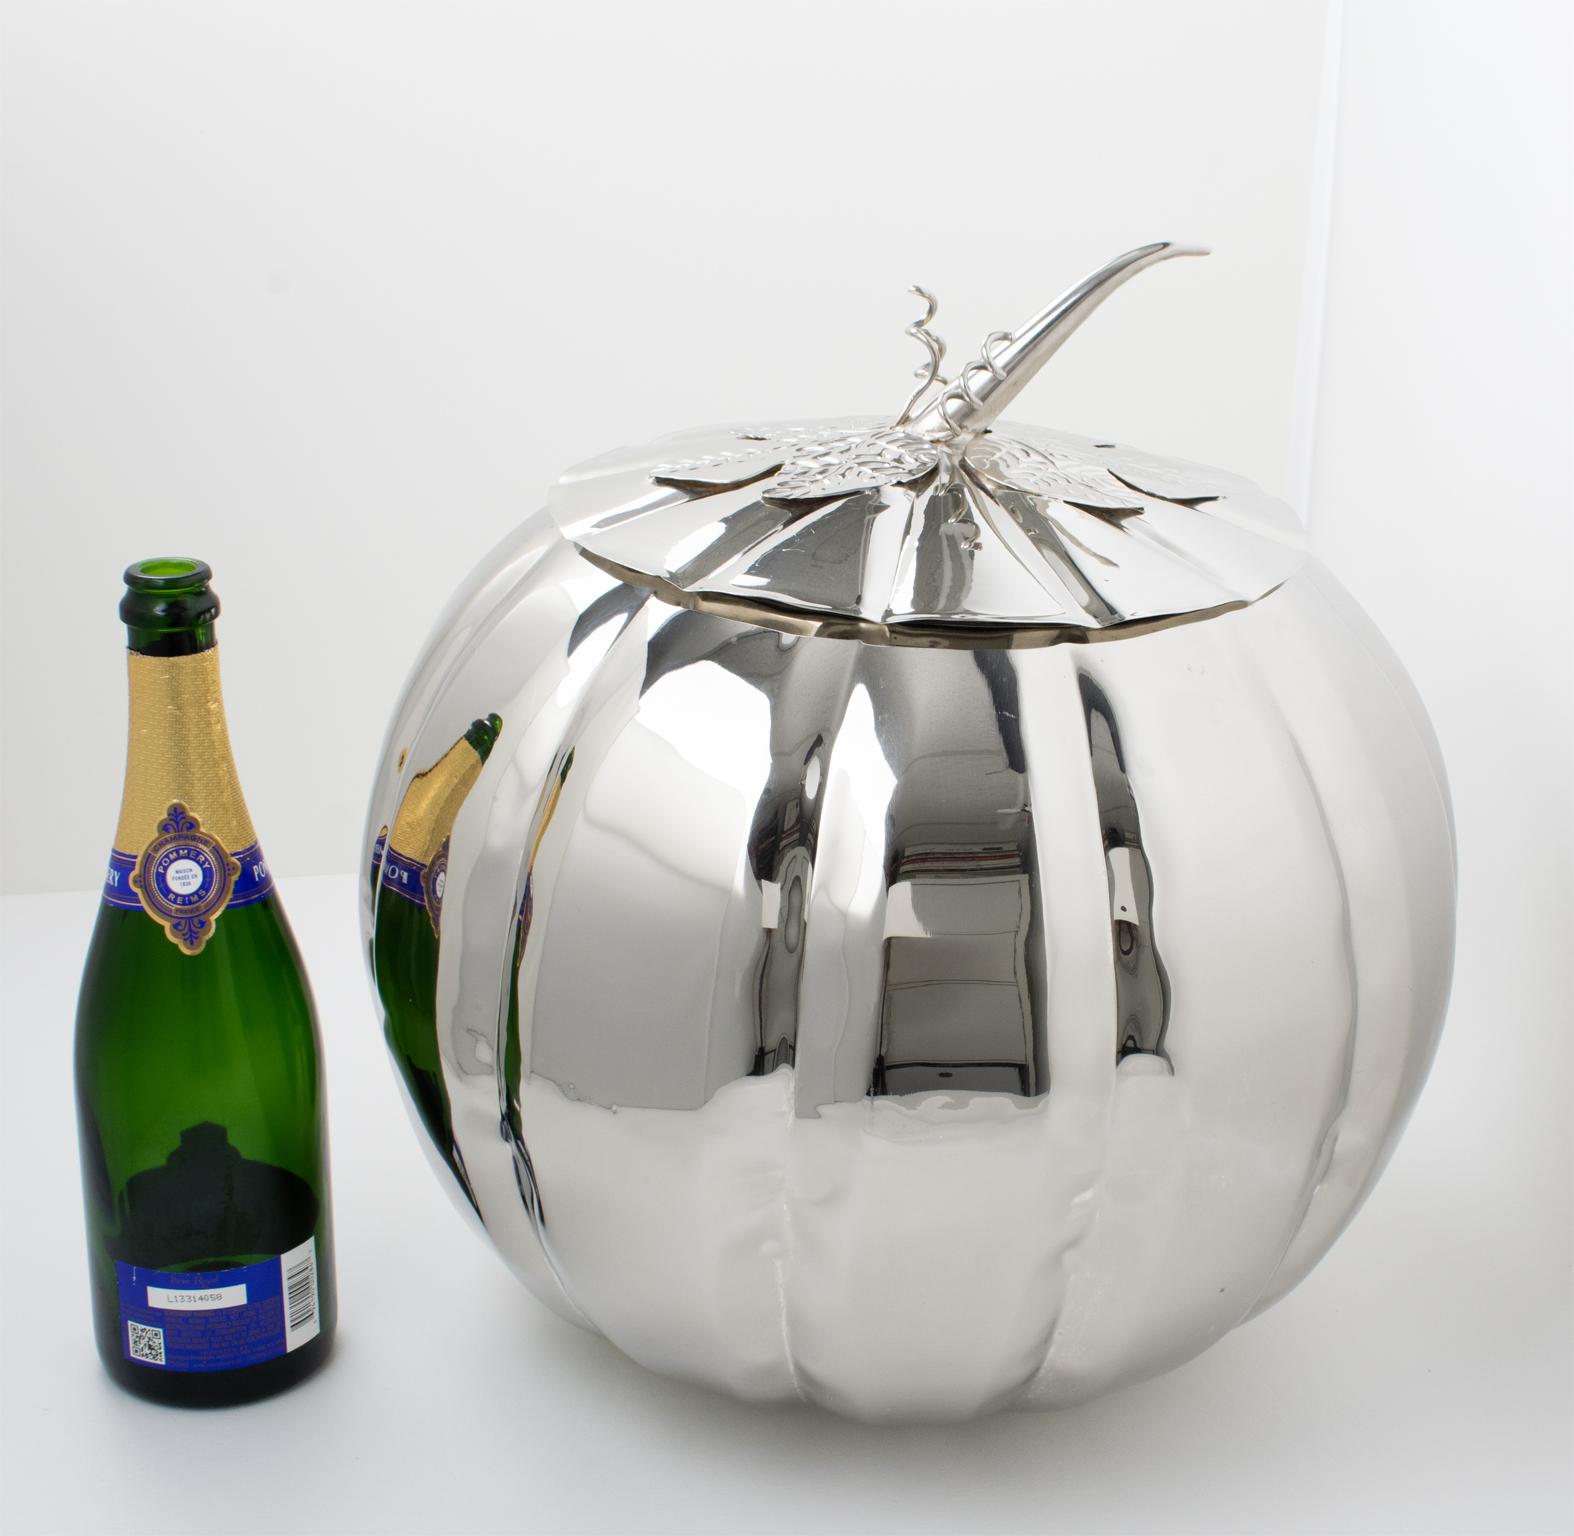 Right on time for The Holidays, impress your guests with this gigantic silver plate punch bowl. The barware serving set included a giant pumpkin-shaped container with a lid and its serving ladle with an organic carved design. Please check carefully